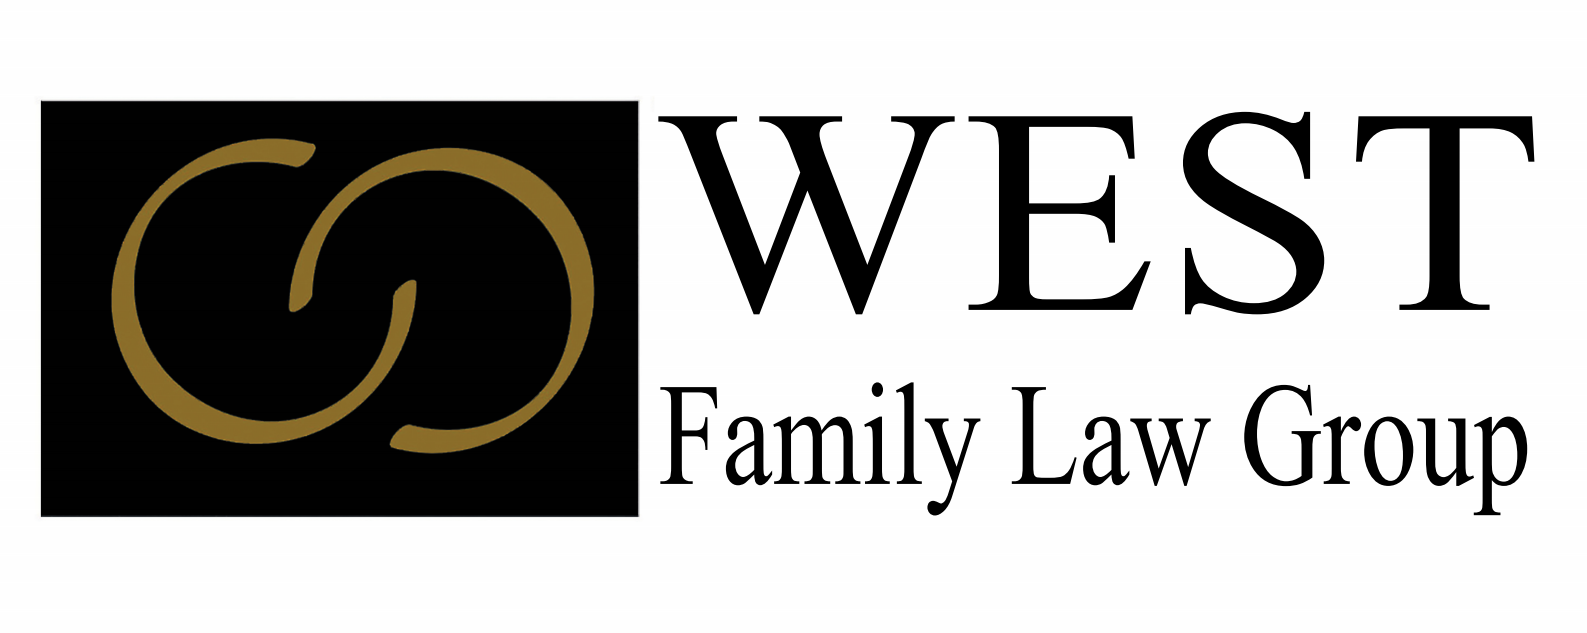 West Family Law Group